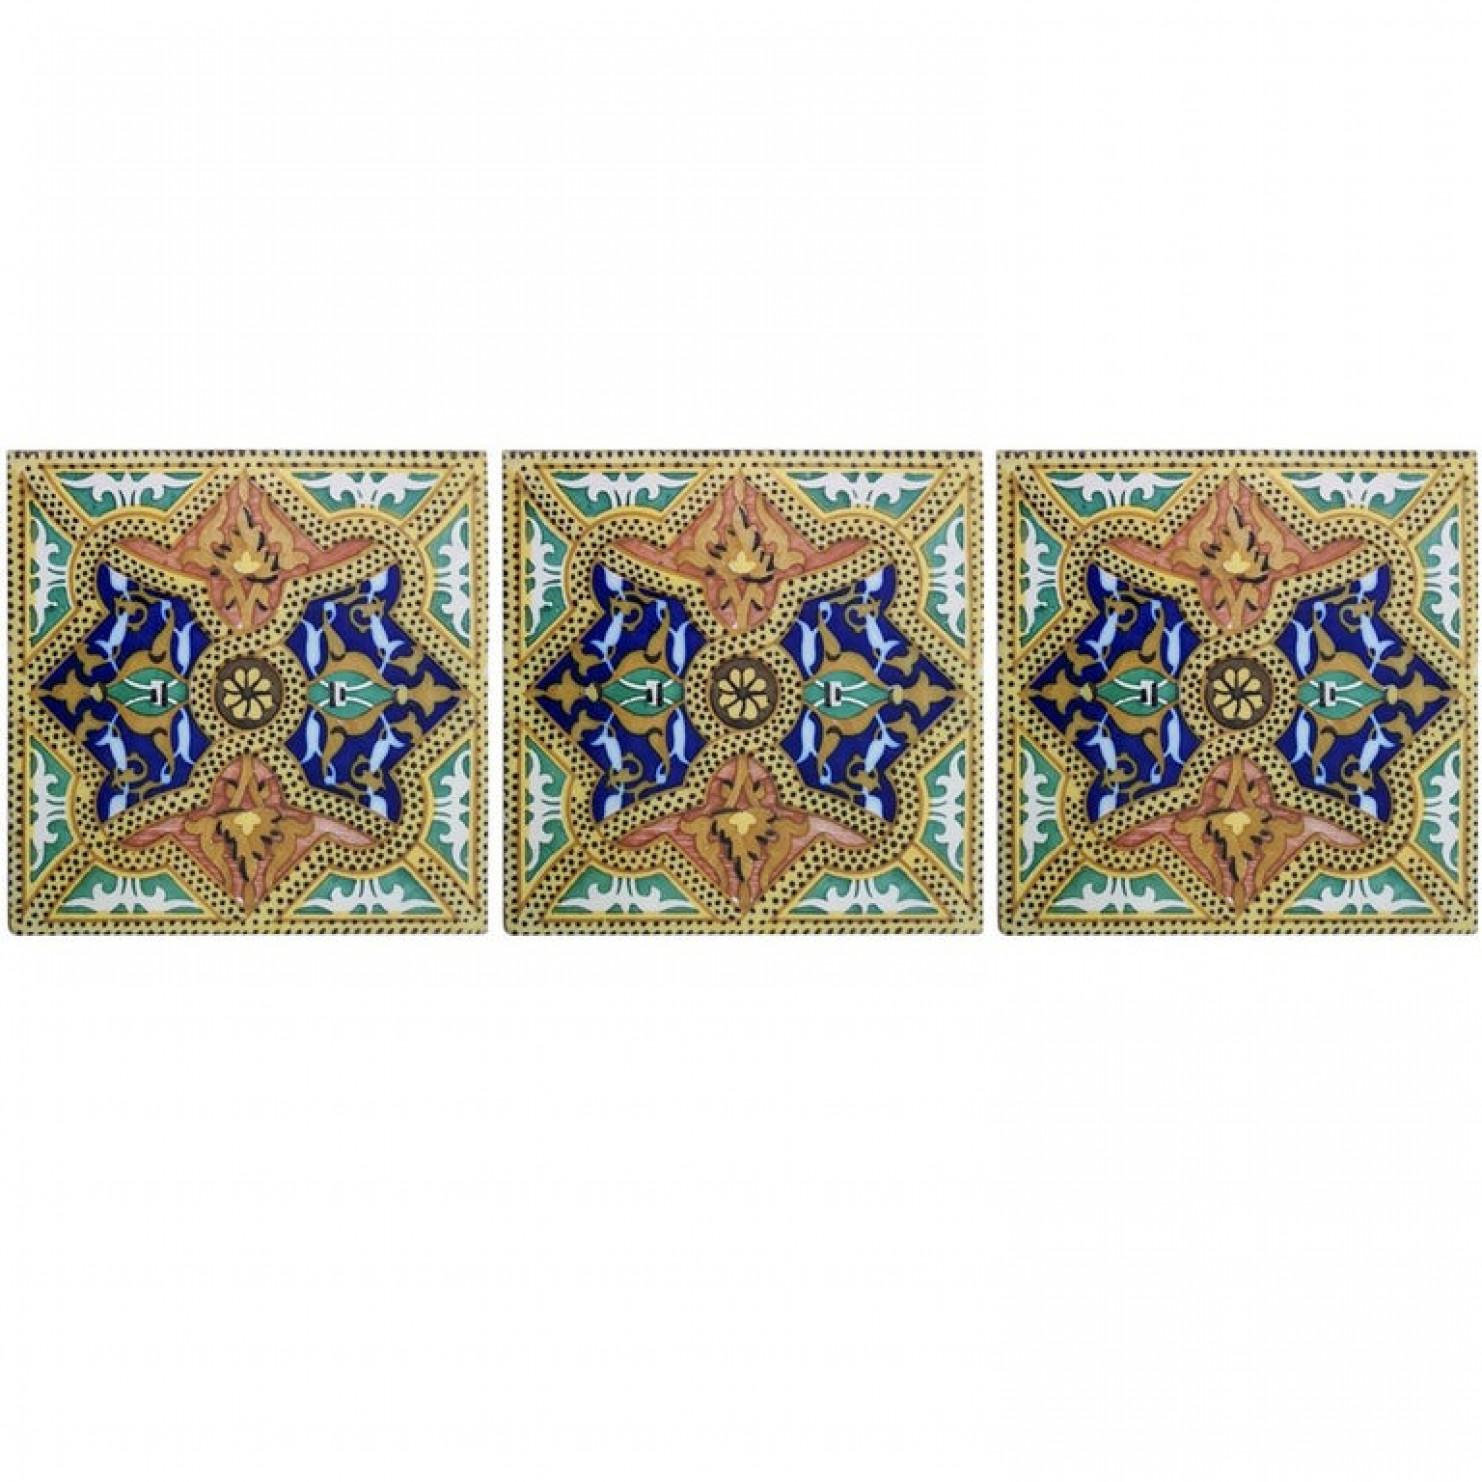 1 of the 6 Exceptional antique Spanish wall tiles, white with rich warm colors (Onda, Spain Valencia).
The dimensions per tile are 7.9 inch (20 cm) × 7.9 inch (20 cm).

Please note that the piece is for 1 piece. Several pieces available.

Condition